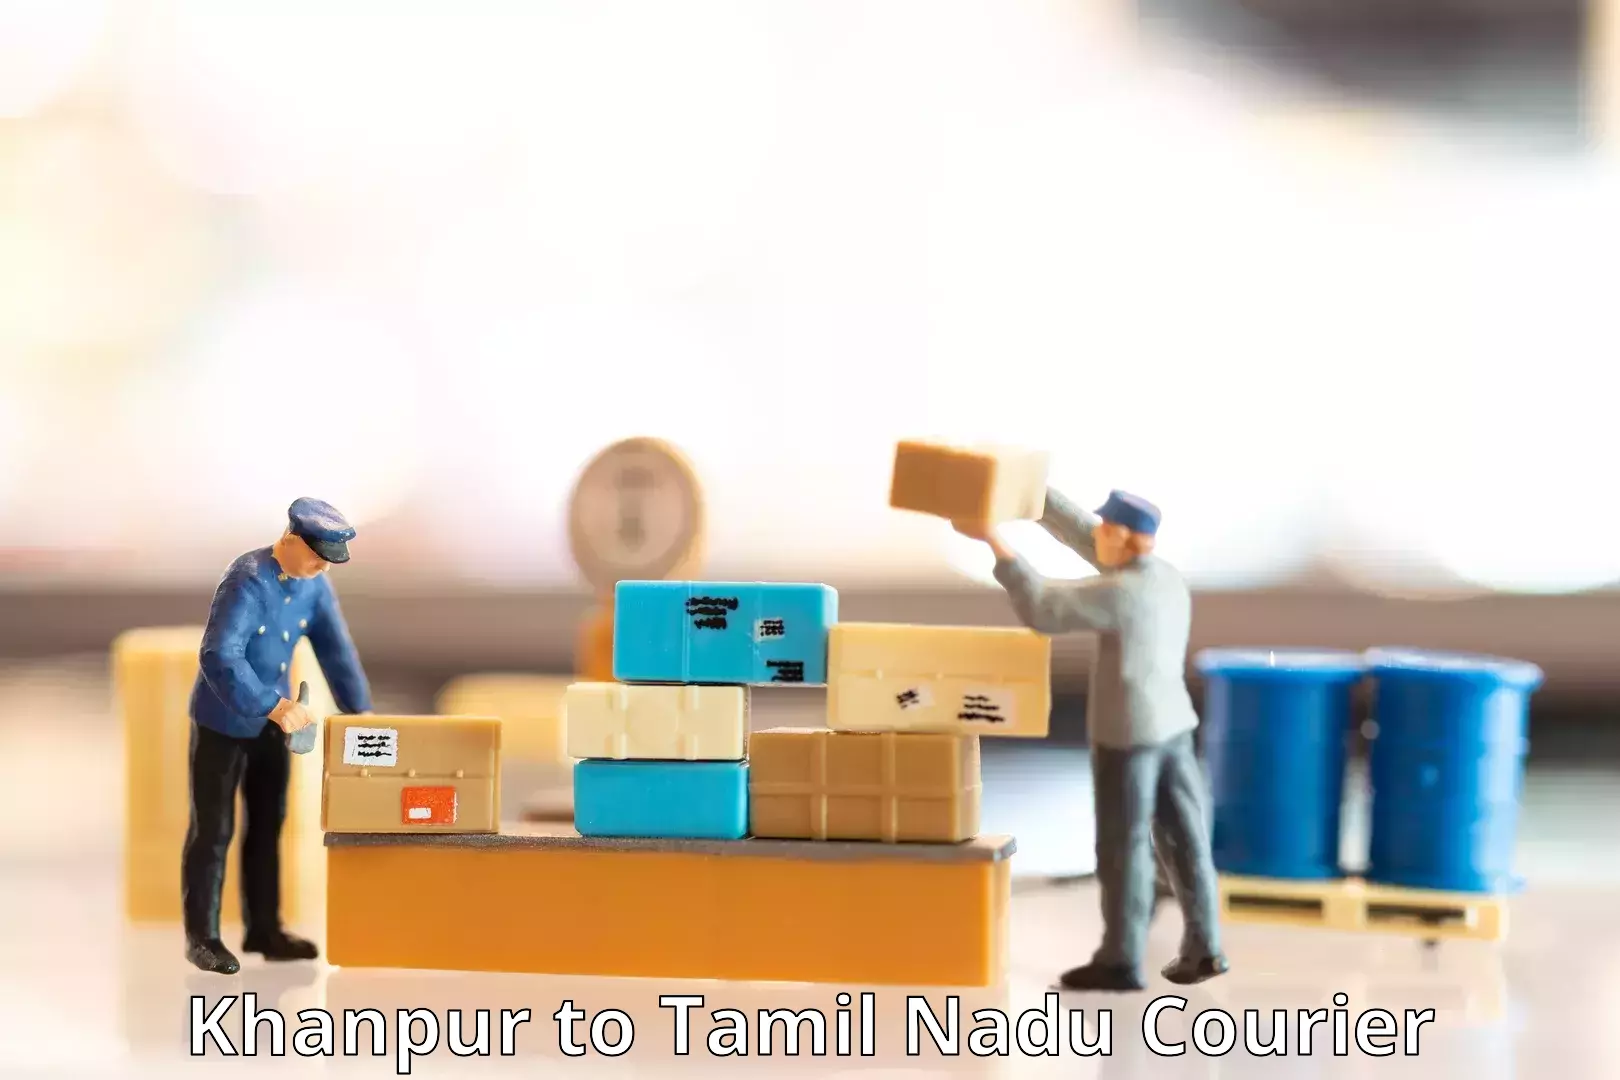 Reliable courier service Khanpur to Tirukalukundram